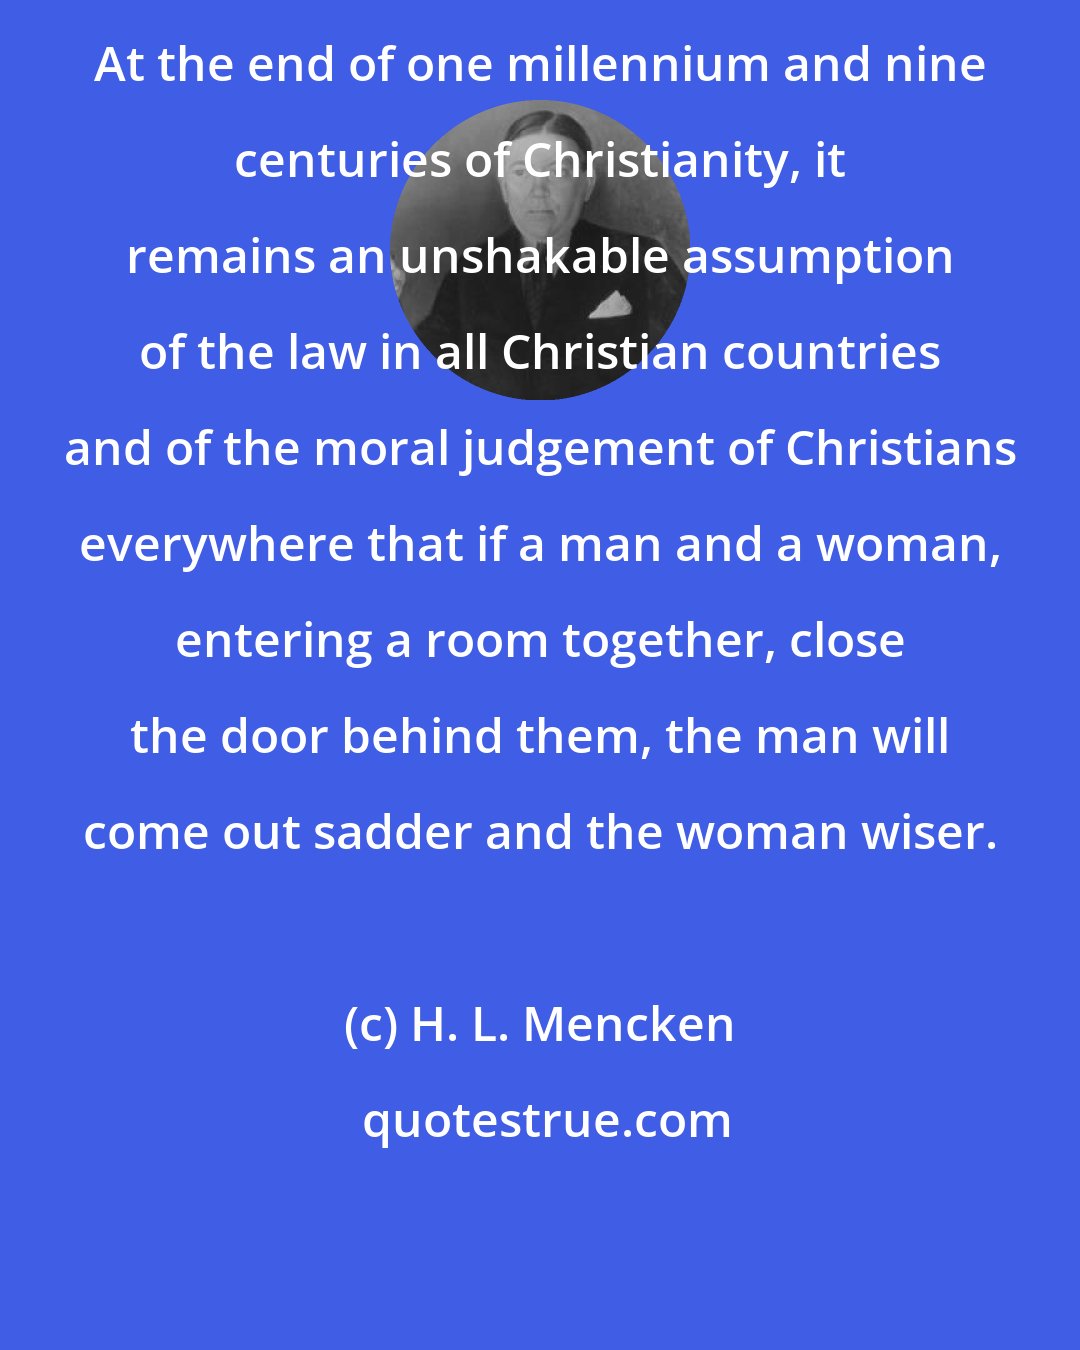 H. L. Mencken: At the end of one millennium and nine centuries of Christianity, it remains an unshakable assumption of the law in all Christian countries and of the moral judgement of Christians everywhere that if a man and a woman, entering a room together, close the door behind them, the man will come out sadder and the woman wiser.